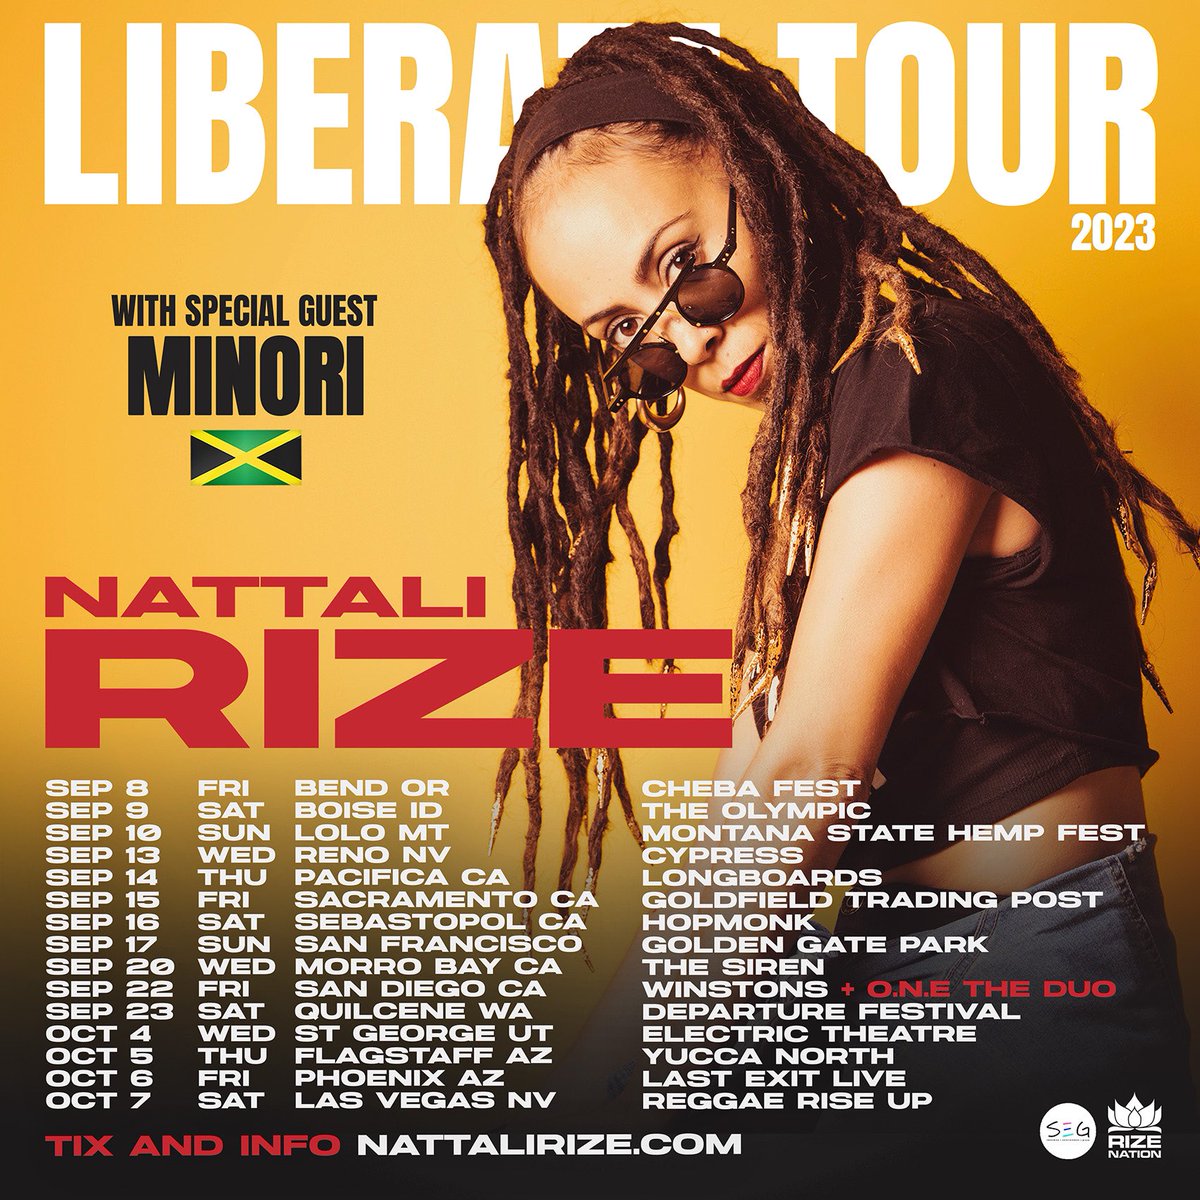 See you this Friday for the start of the second run of our Liberate Tour in the USA 🔥 #FullFreedom #liberationtime @Minifromdiblock #rizenation All tix nattalirize.com